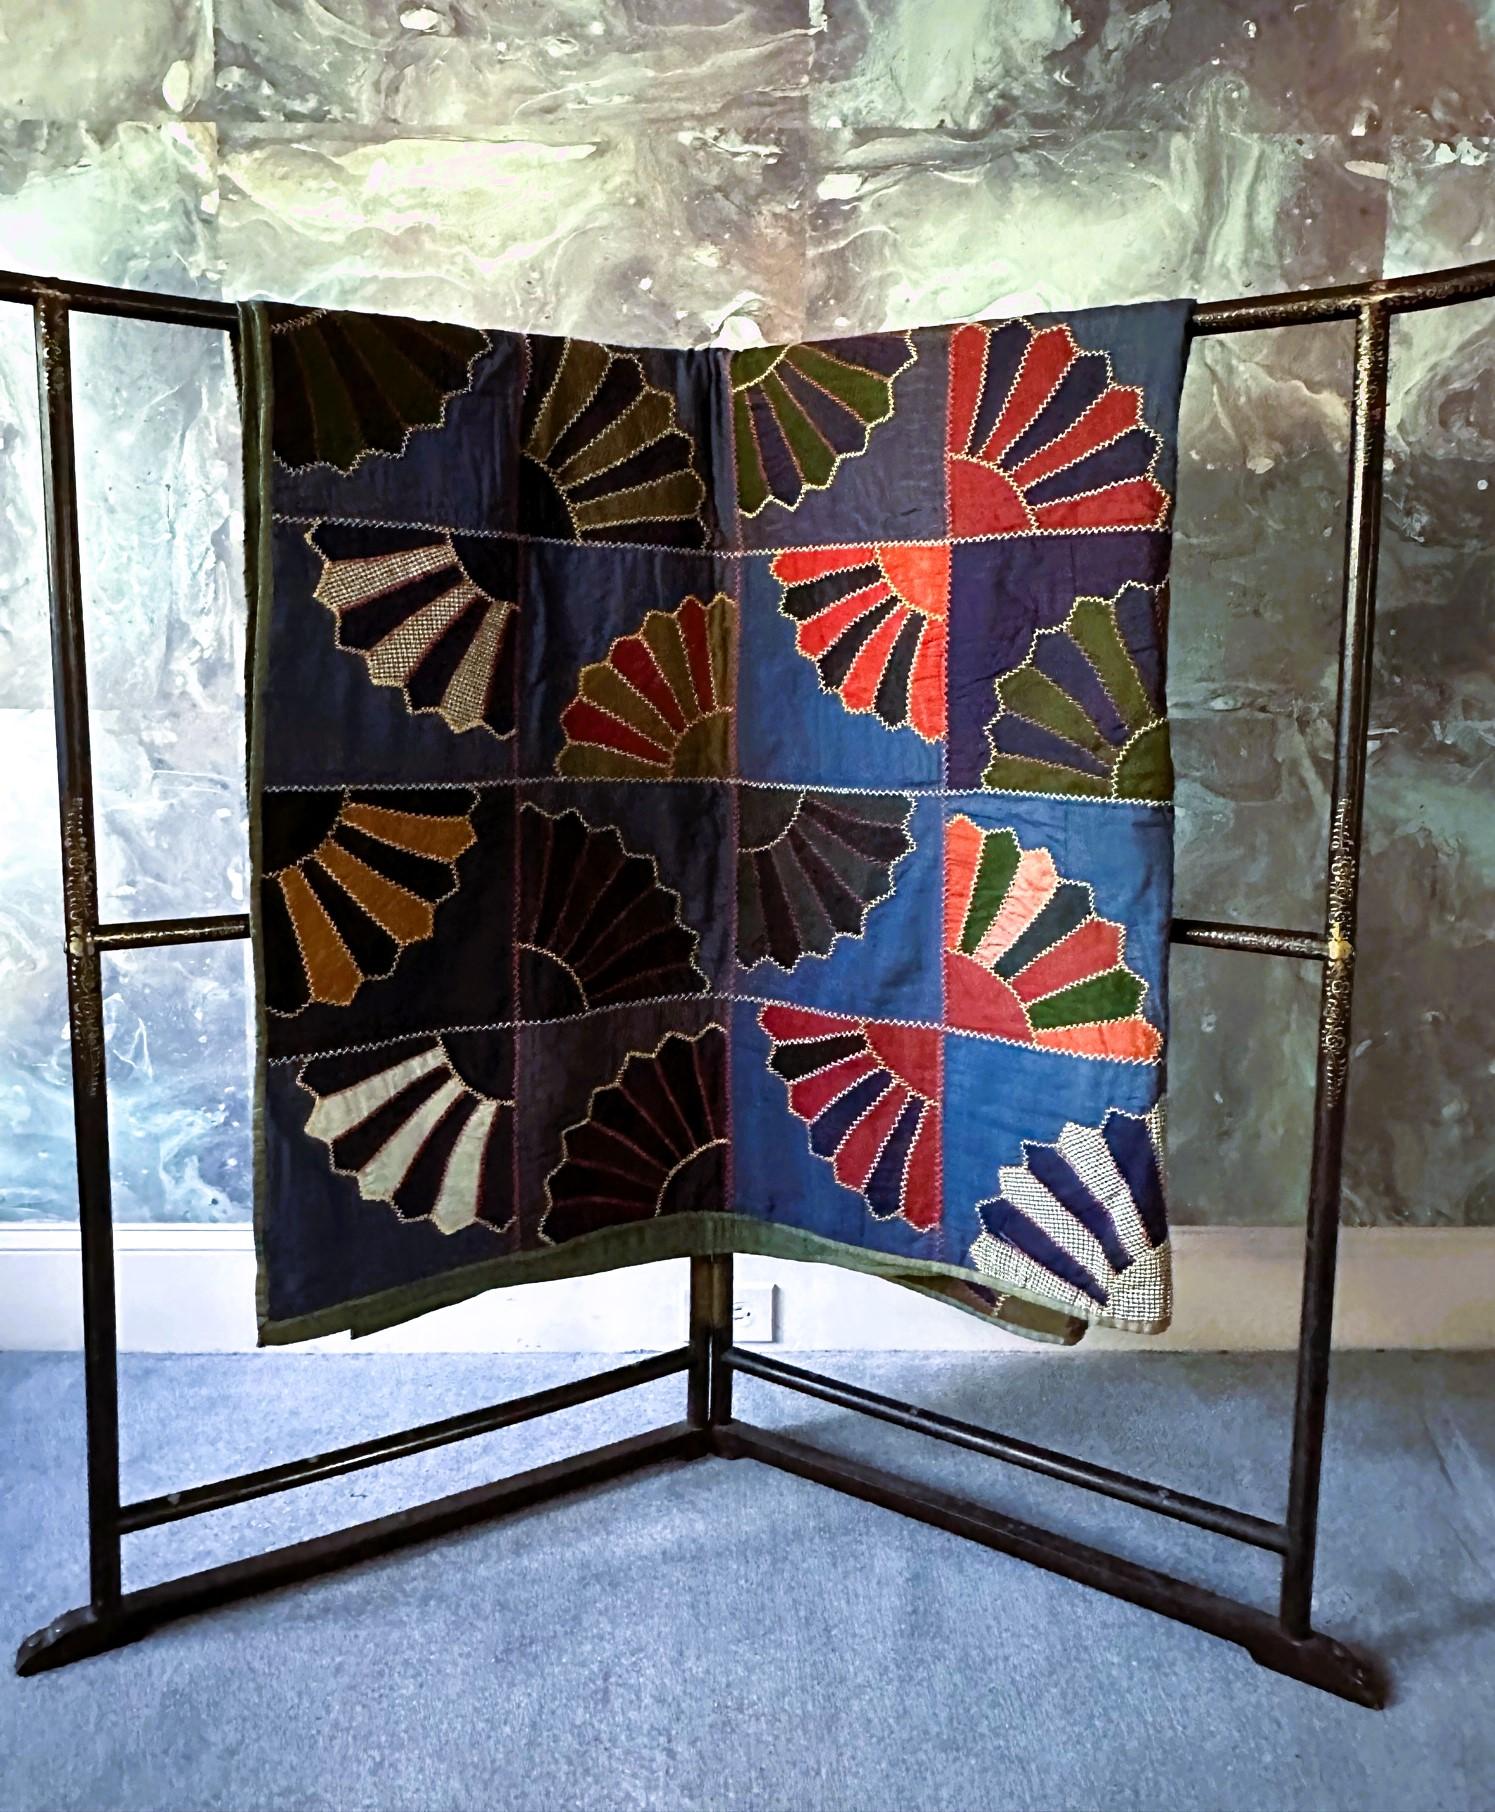 An antique hand-made quilt circa 1890-1900s originated from Ohio. The quilt features a striking patched square pattern with fan motifs, all hand stitched with colorful cotton appliques on a two blue shades background. All the patchwork and applique